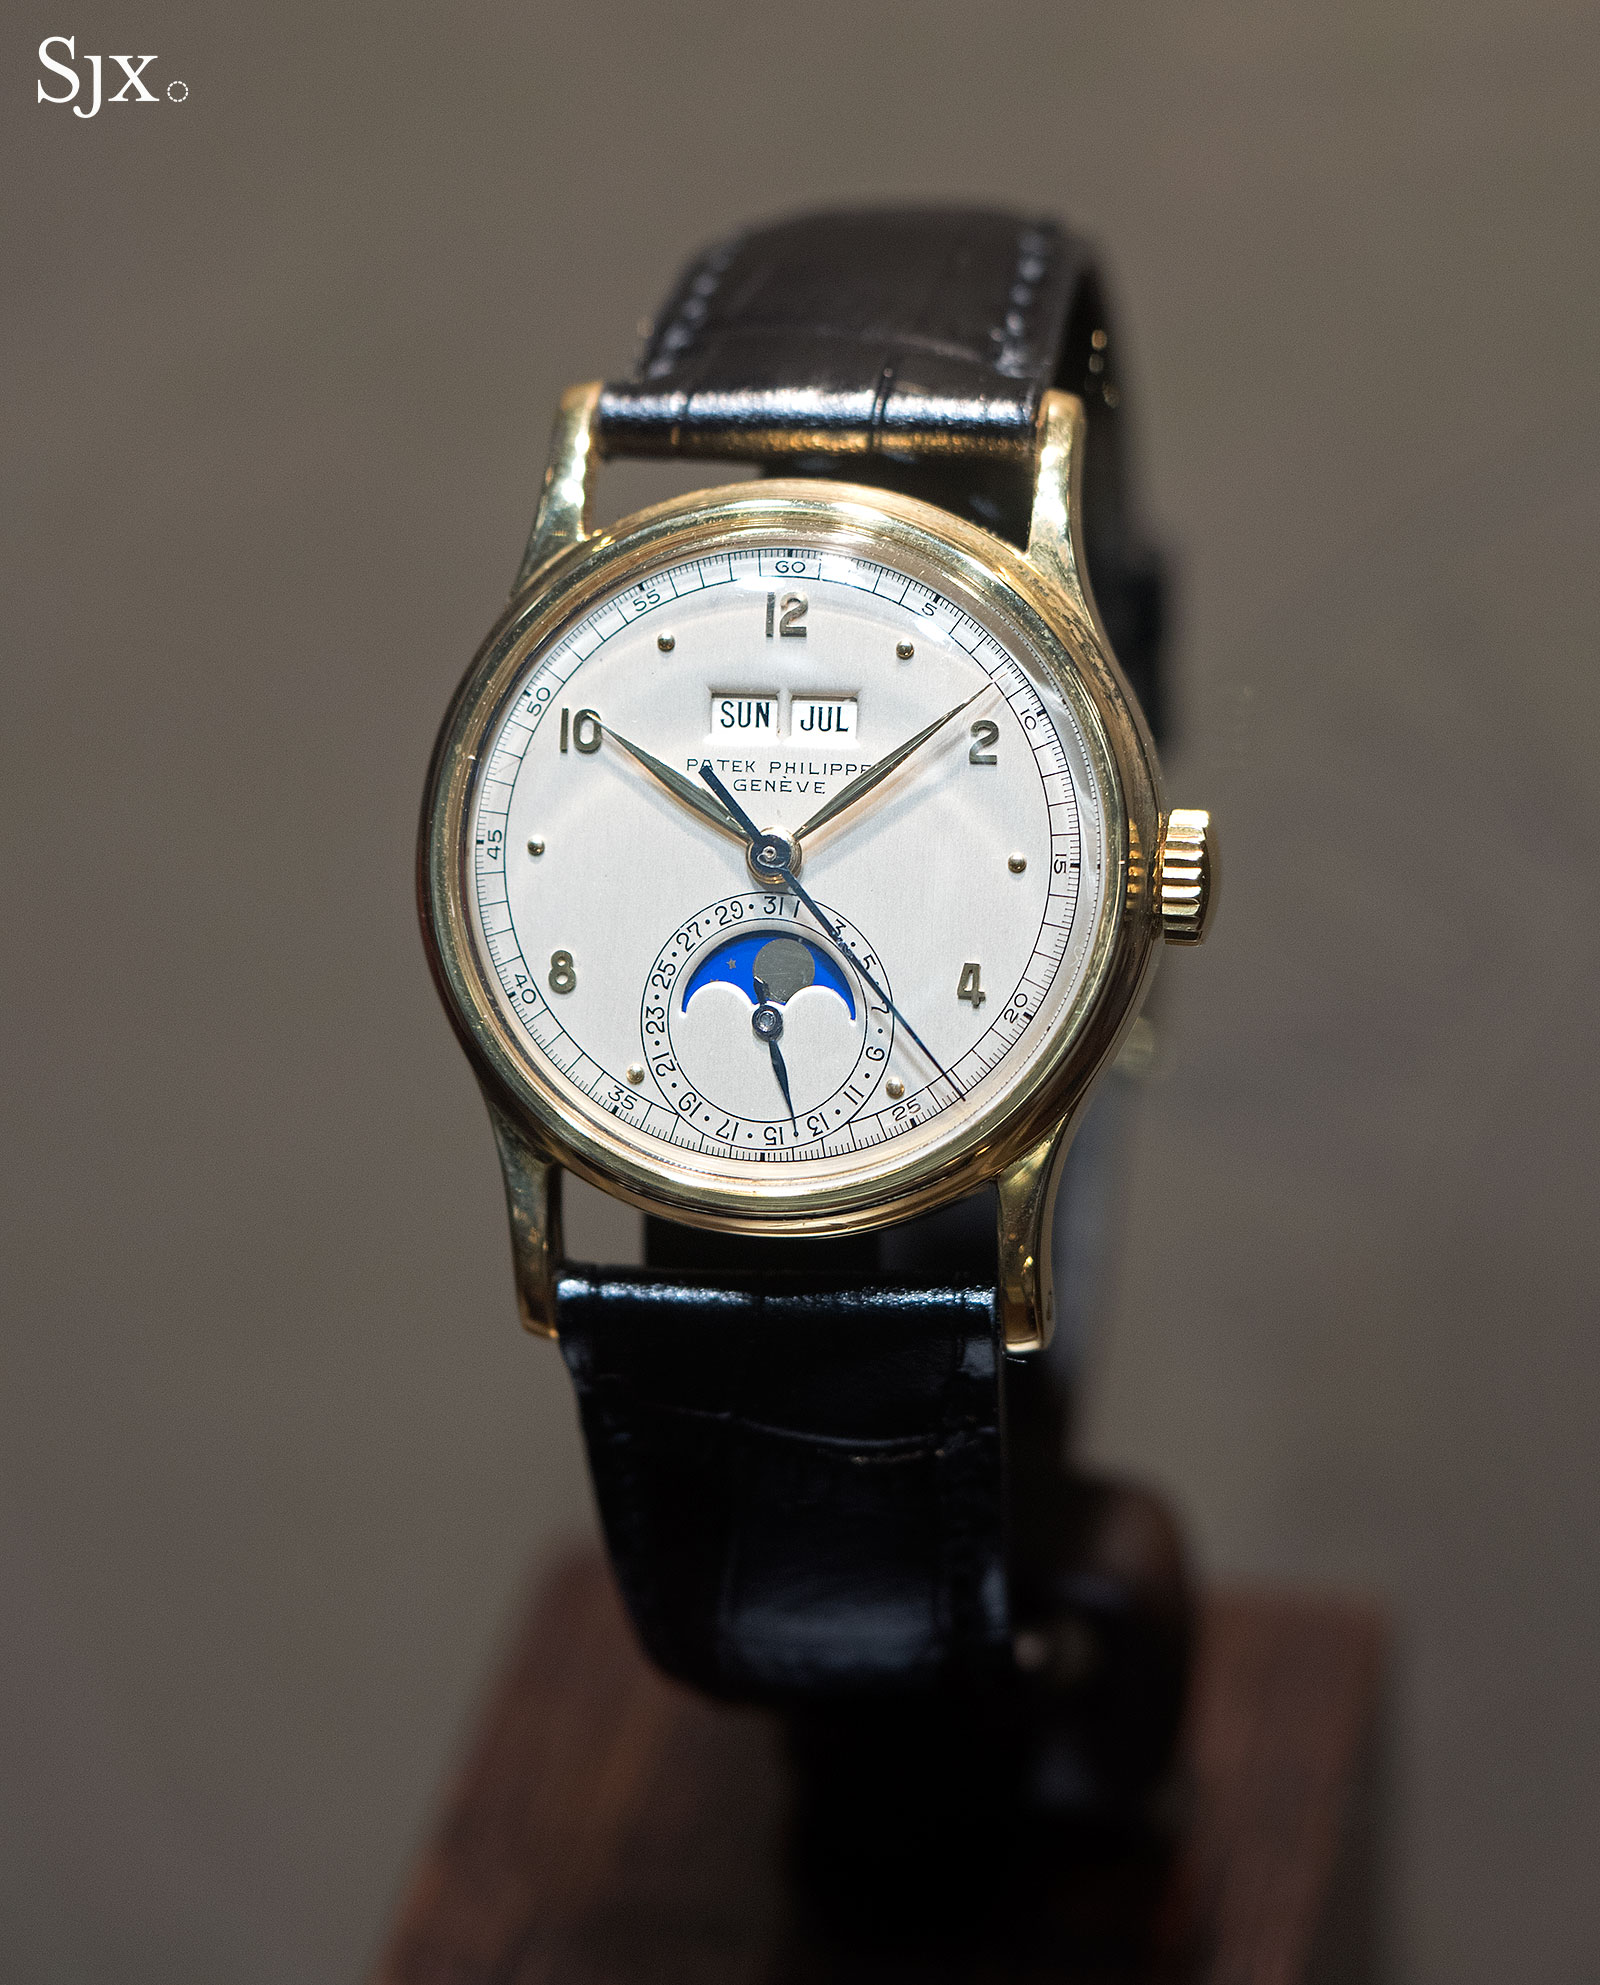 Measuring Eternity – Three Facts to Know About the Patek Philippe ...